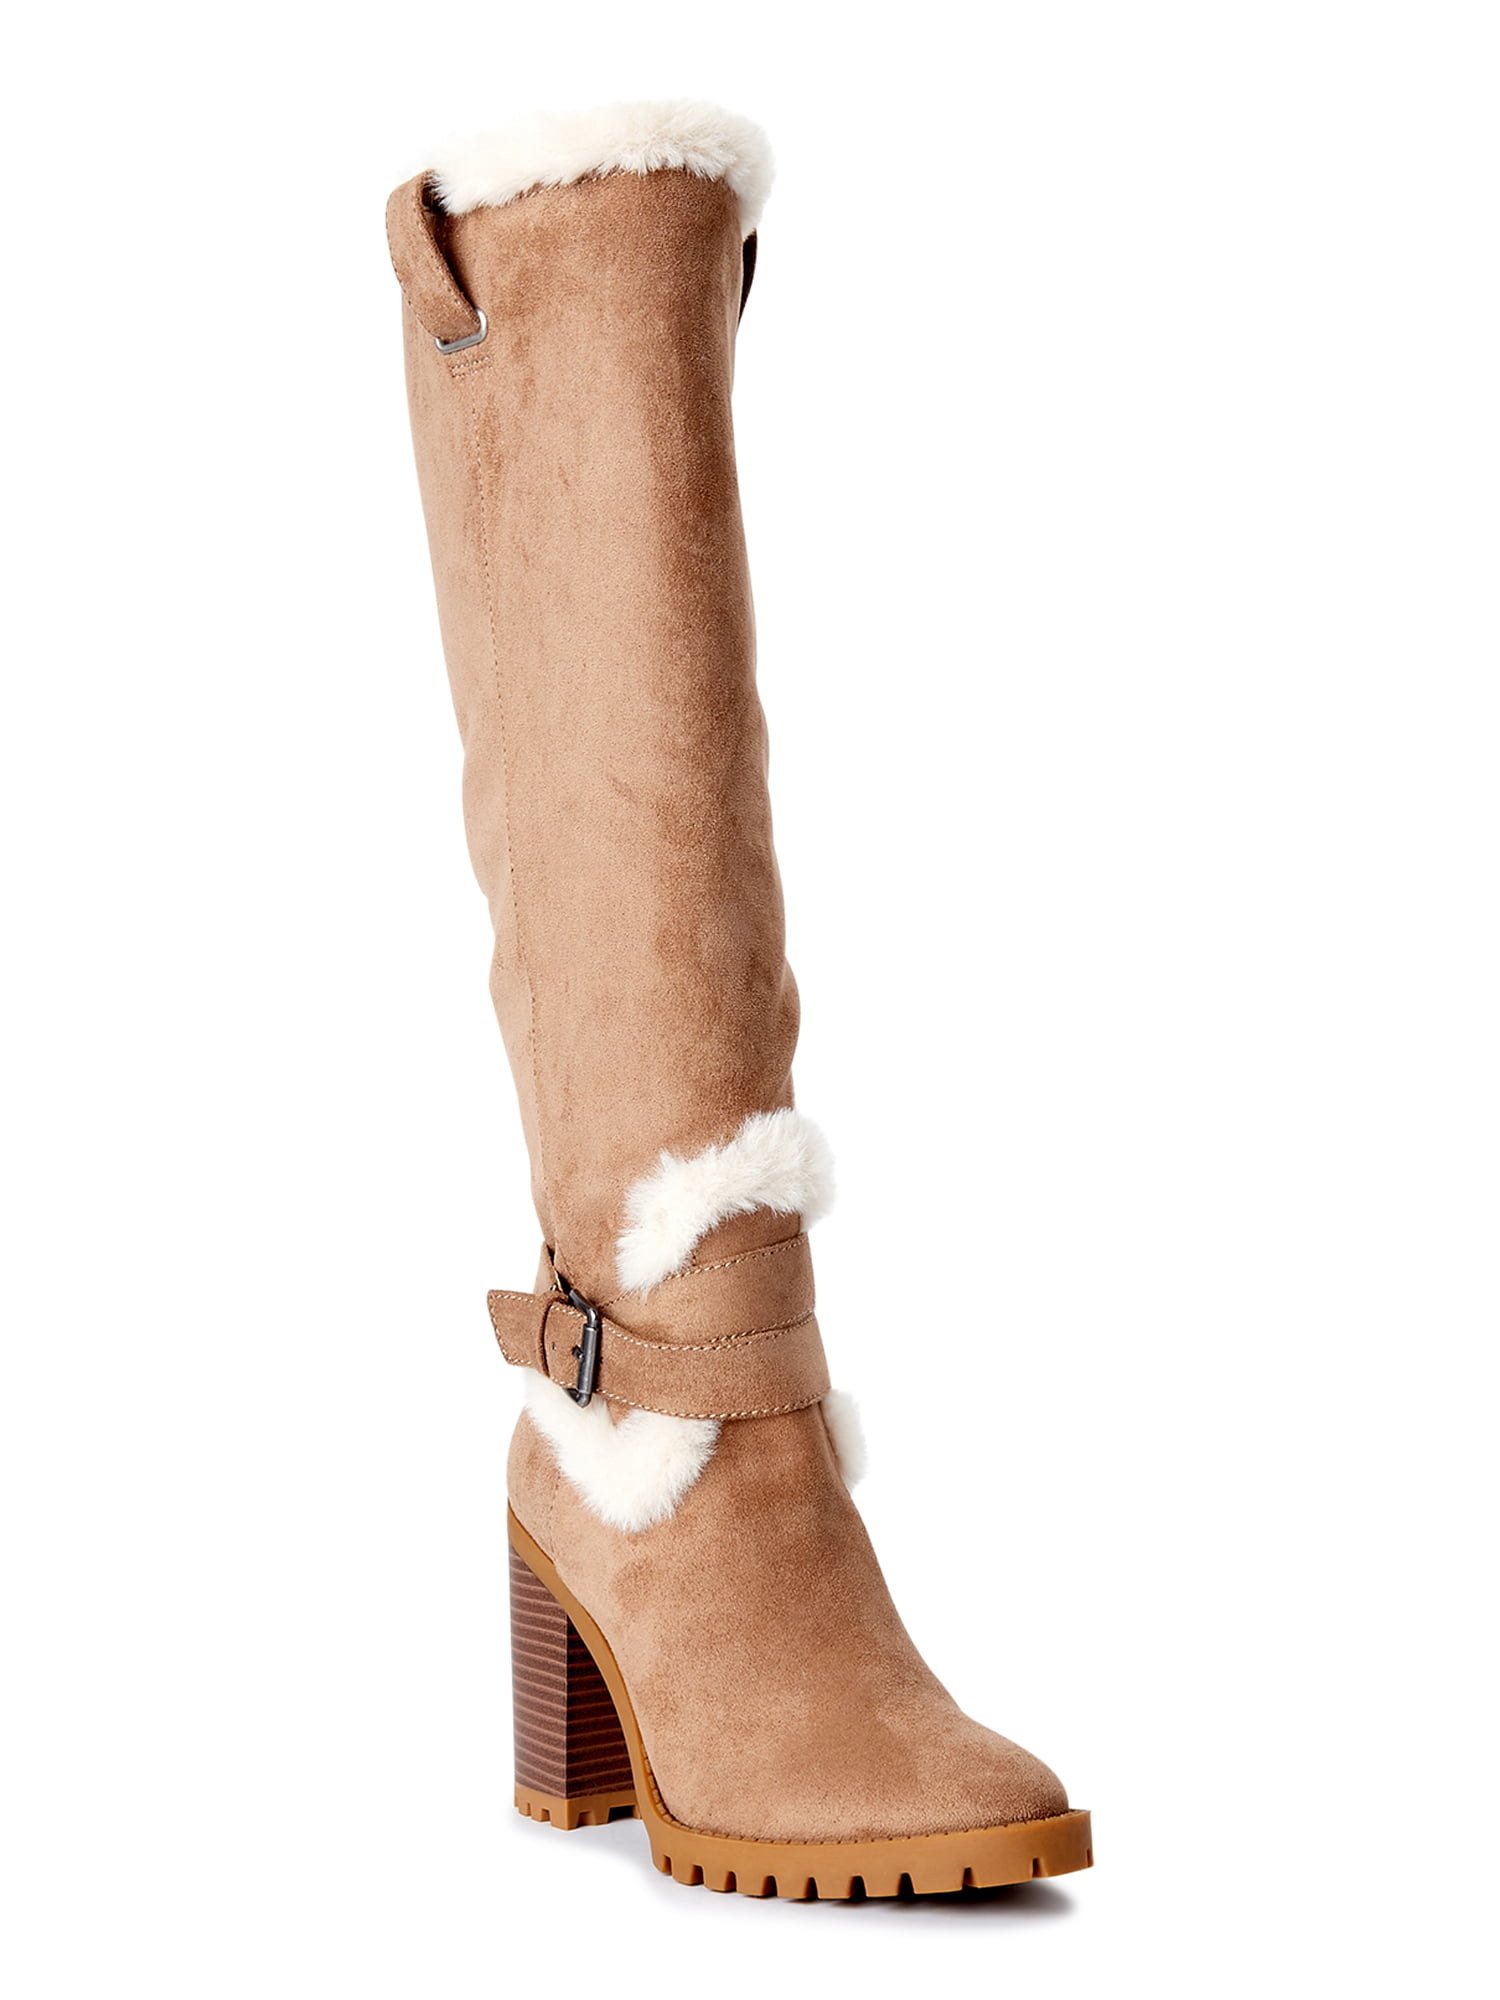 The tan heeled boot with white faux fur trim